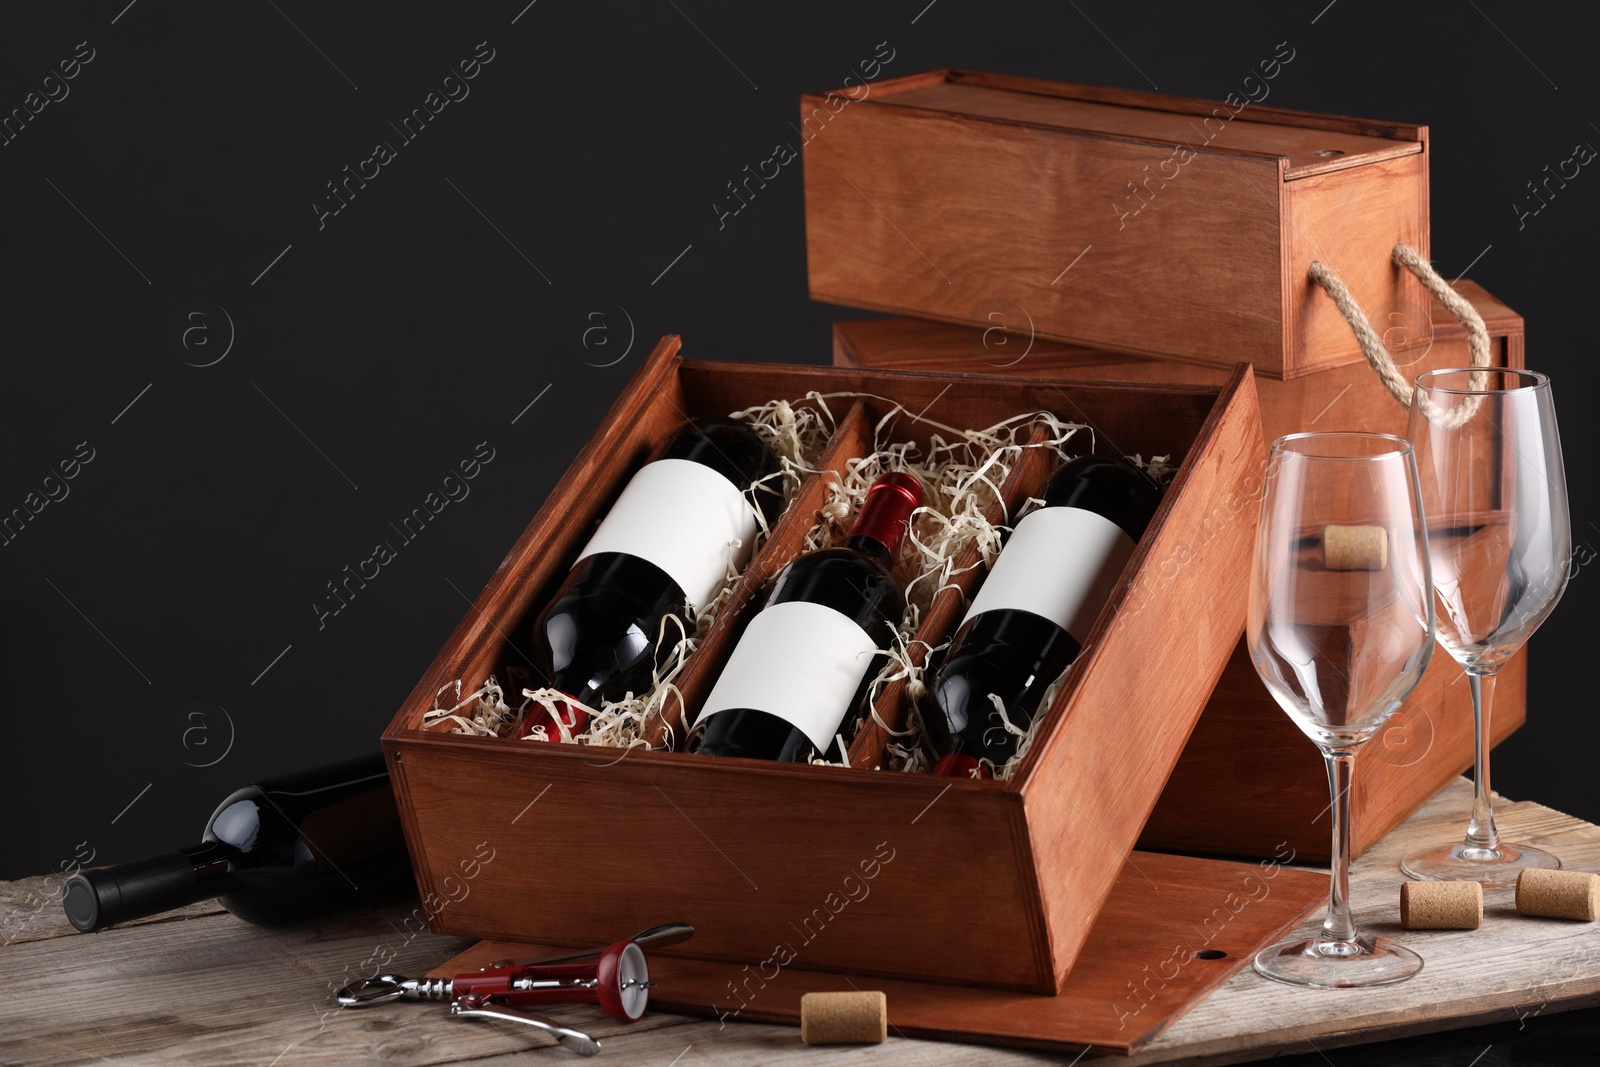 Photo of Box with wine bottles and glasses on wooden table against black background